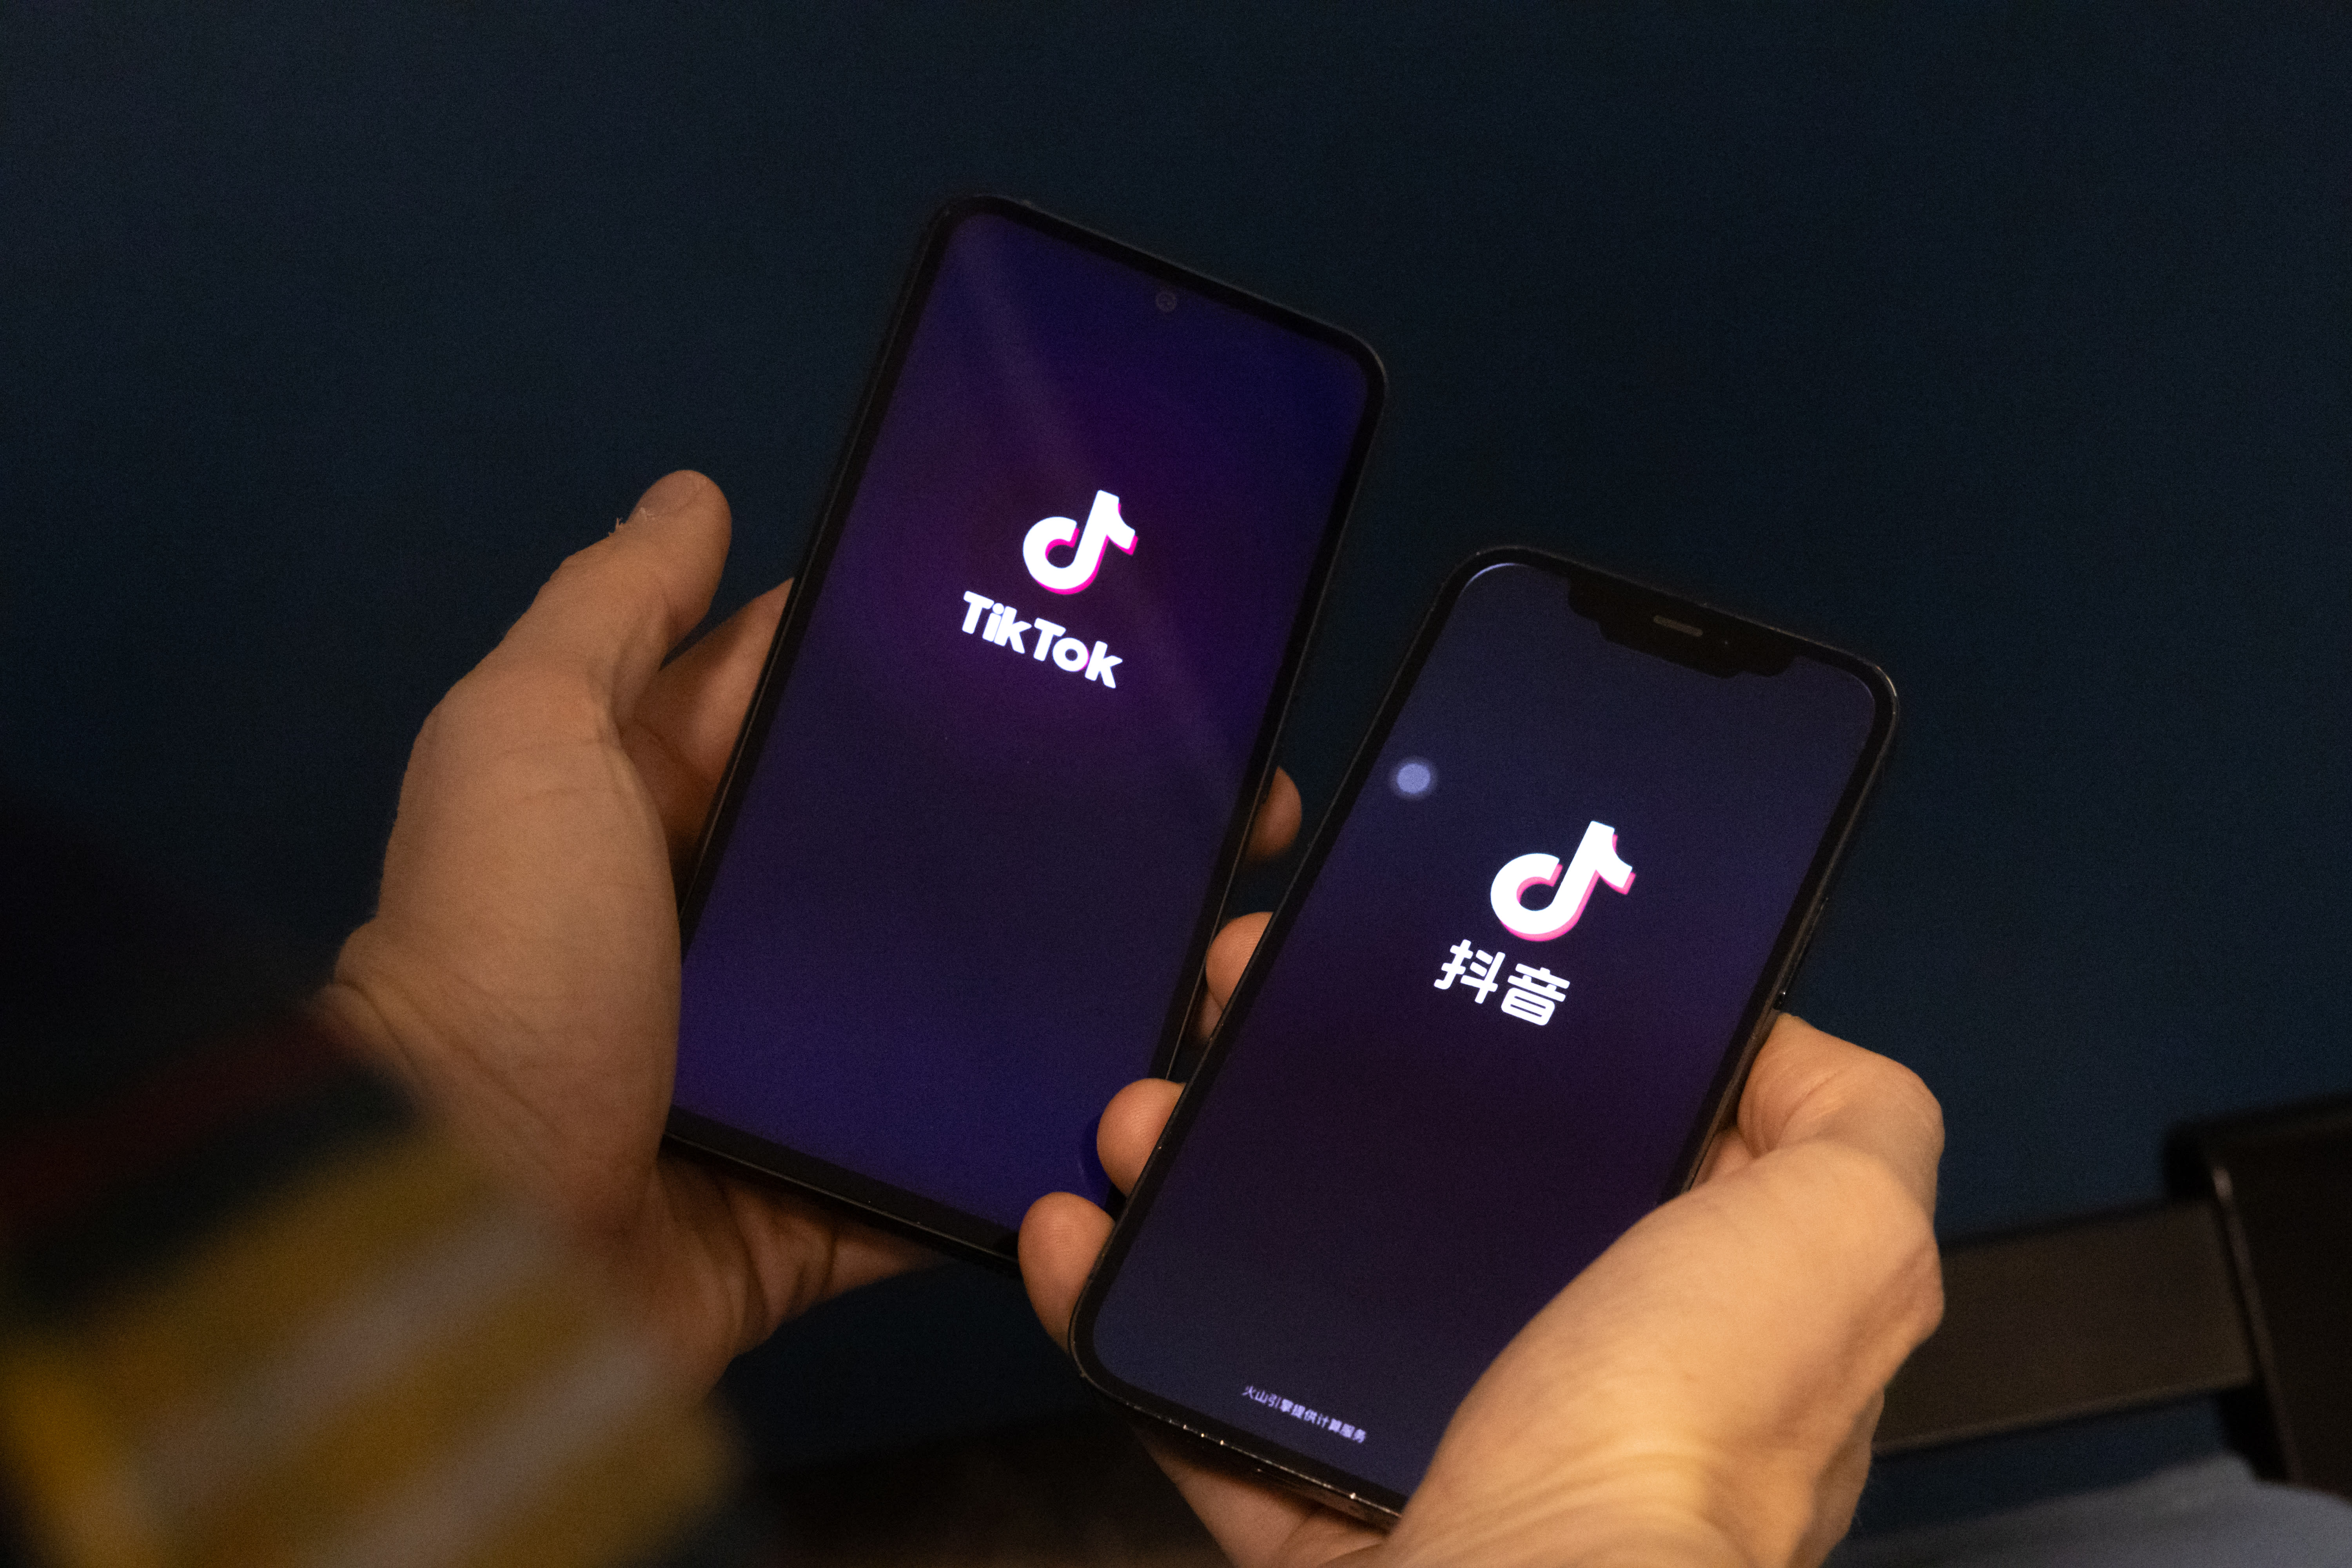 Supo: The Chinese government may see your Tiktok data